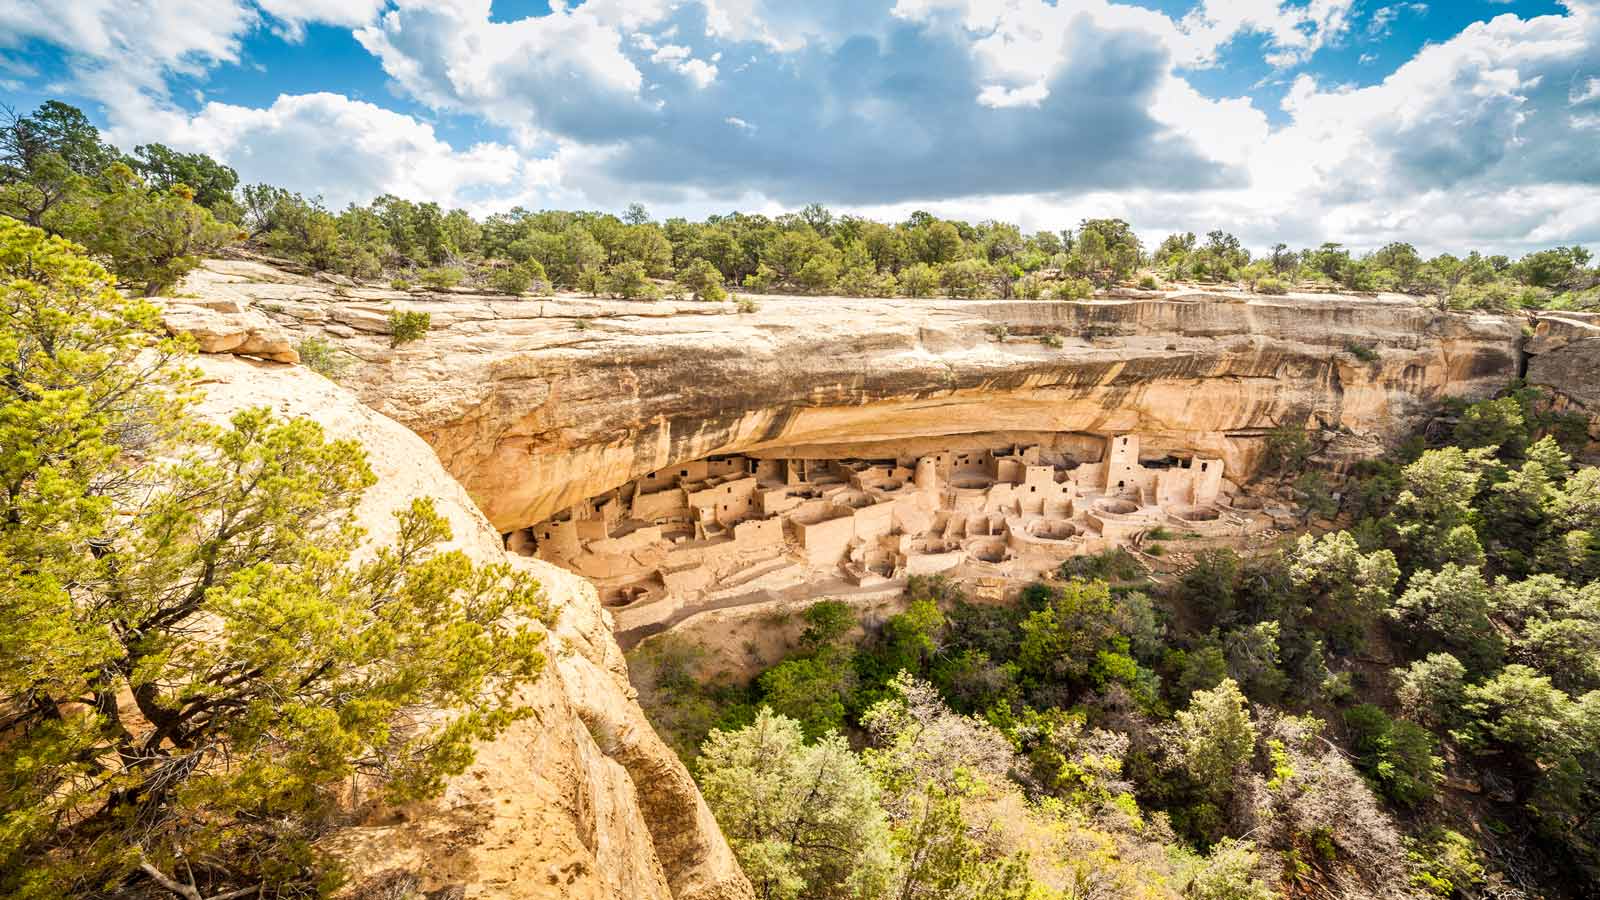 <p>Located in the southwestern most corner of the state, Mesa Verde National Park is often overlooked in favor of nature destinations closer to Denver. And that’s a shame because <a href="https://www.nps.gov/meve/index.htm" rel="nofollow noopener">Mesa Verde National Park</a> is fantastic.</p><p>Unlike many other national parks, Mesa Verde National Park is less nature-leaning and more history-leaning. The highlights are the Ancestral Puebloan cliff dwellings, which have remained preserved for thousands of years. No wonder this park snagged the prestigious title of a UNESCO World Heritage Site too.</p>